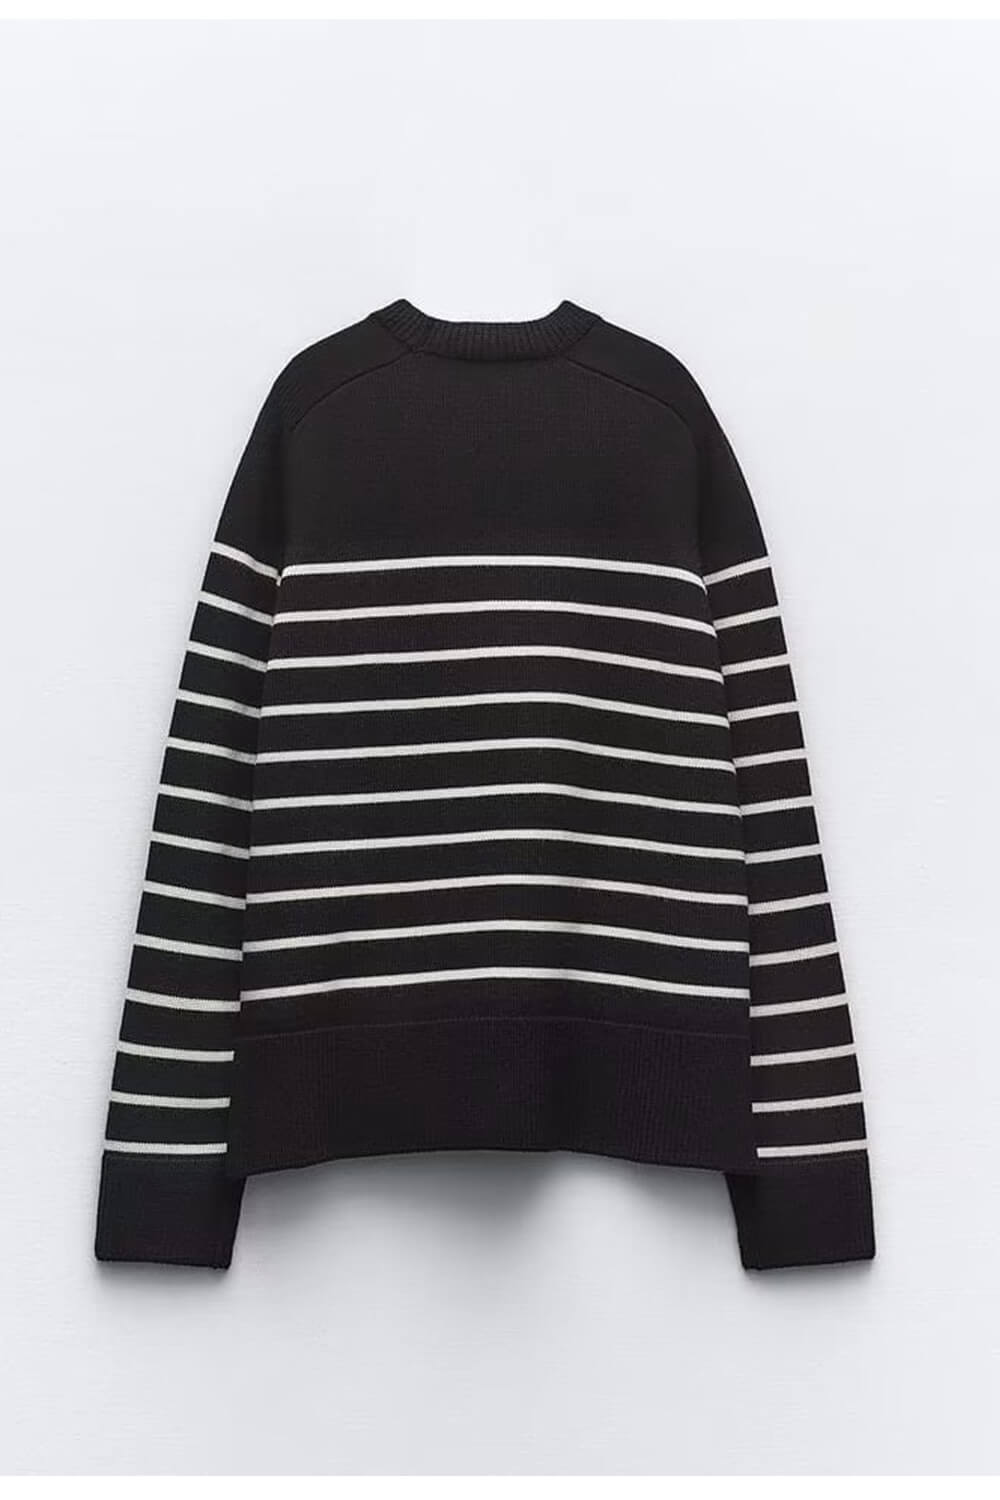 Black And White Striped Round Neck Knit Sweater